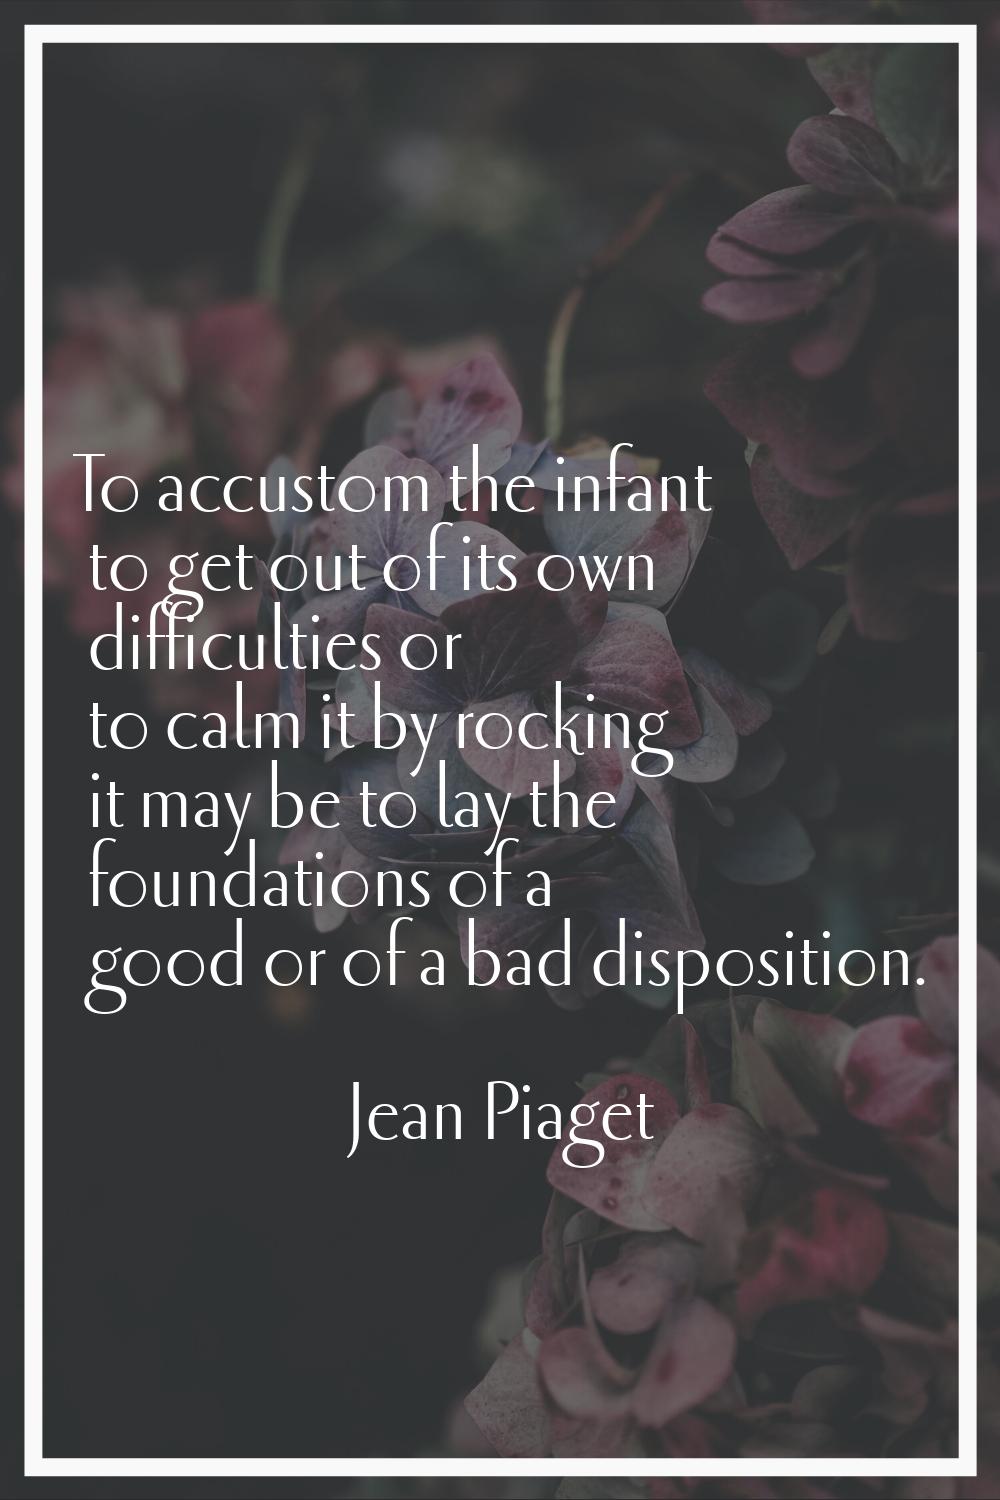 To accustom the infant to get out of its own difficulties or to calm it by rocking it may be to lay